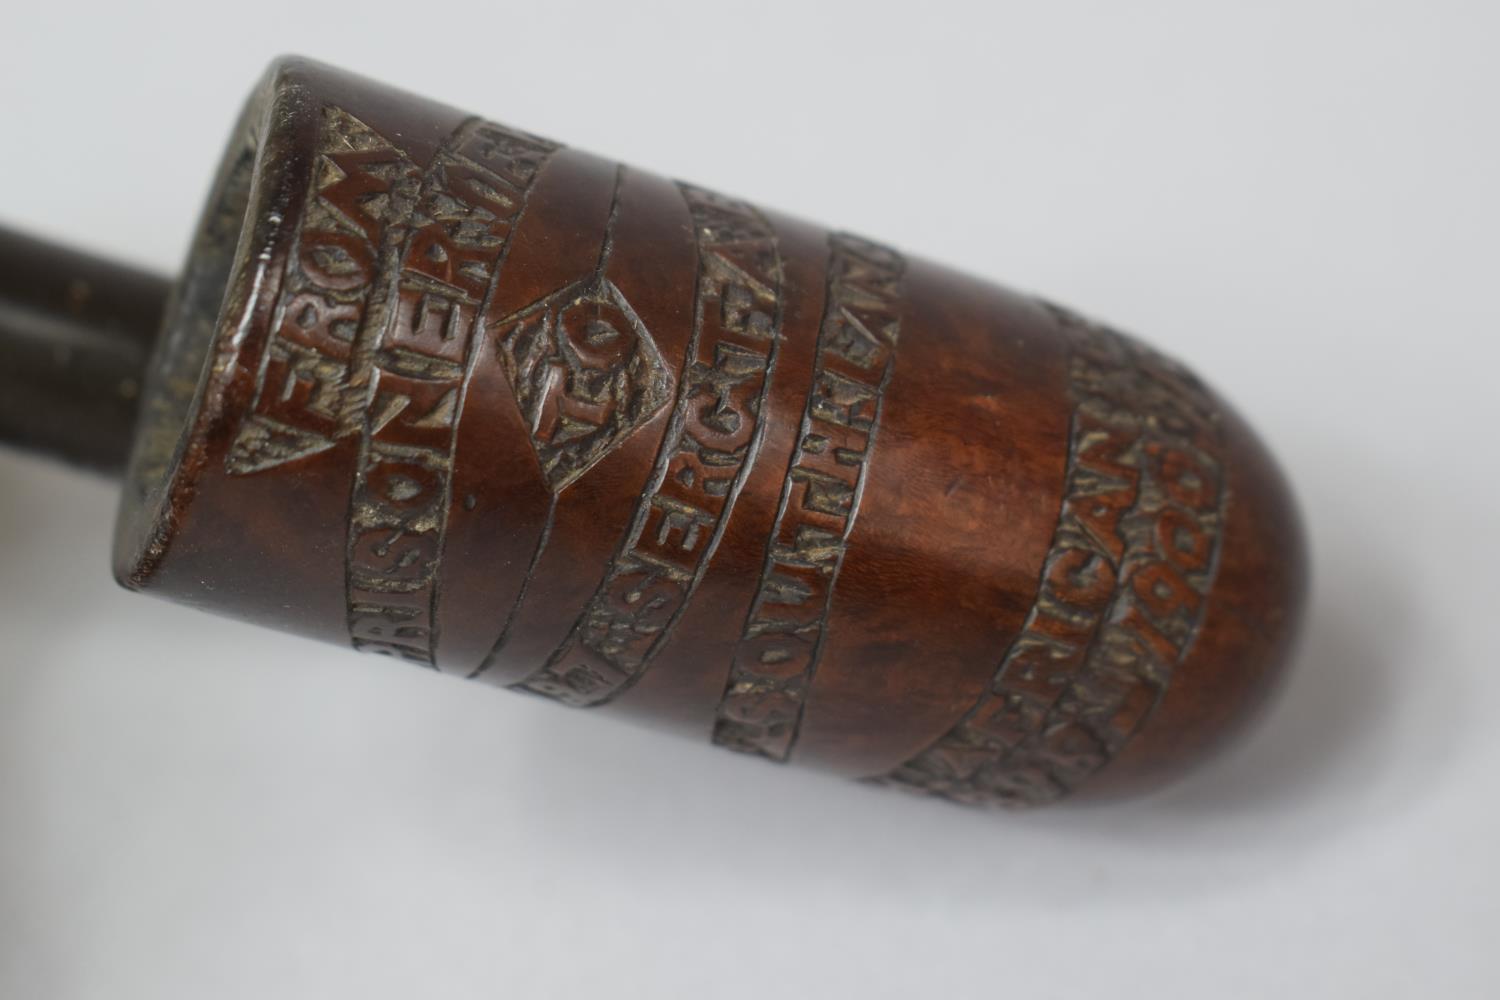 An Unusual Late 19th Century Prisoner of War Briar Pipe, the Bowl Inscribed "From Prisoner of War - Image 2 of 2